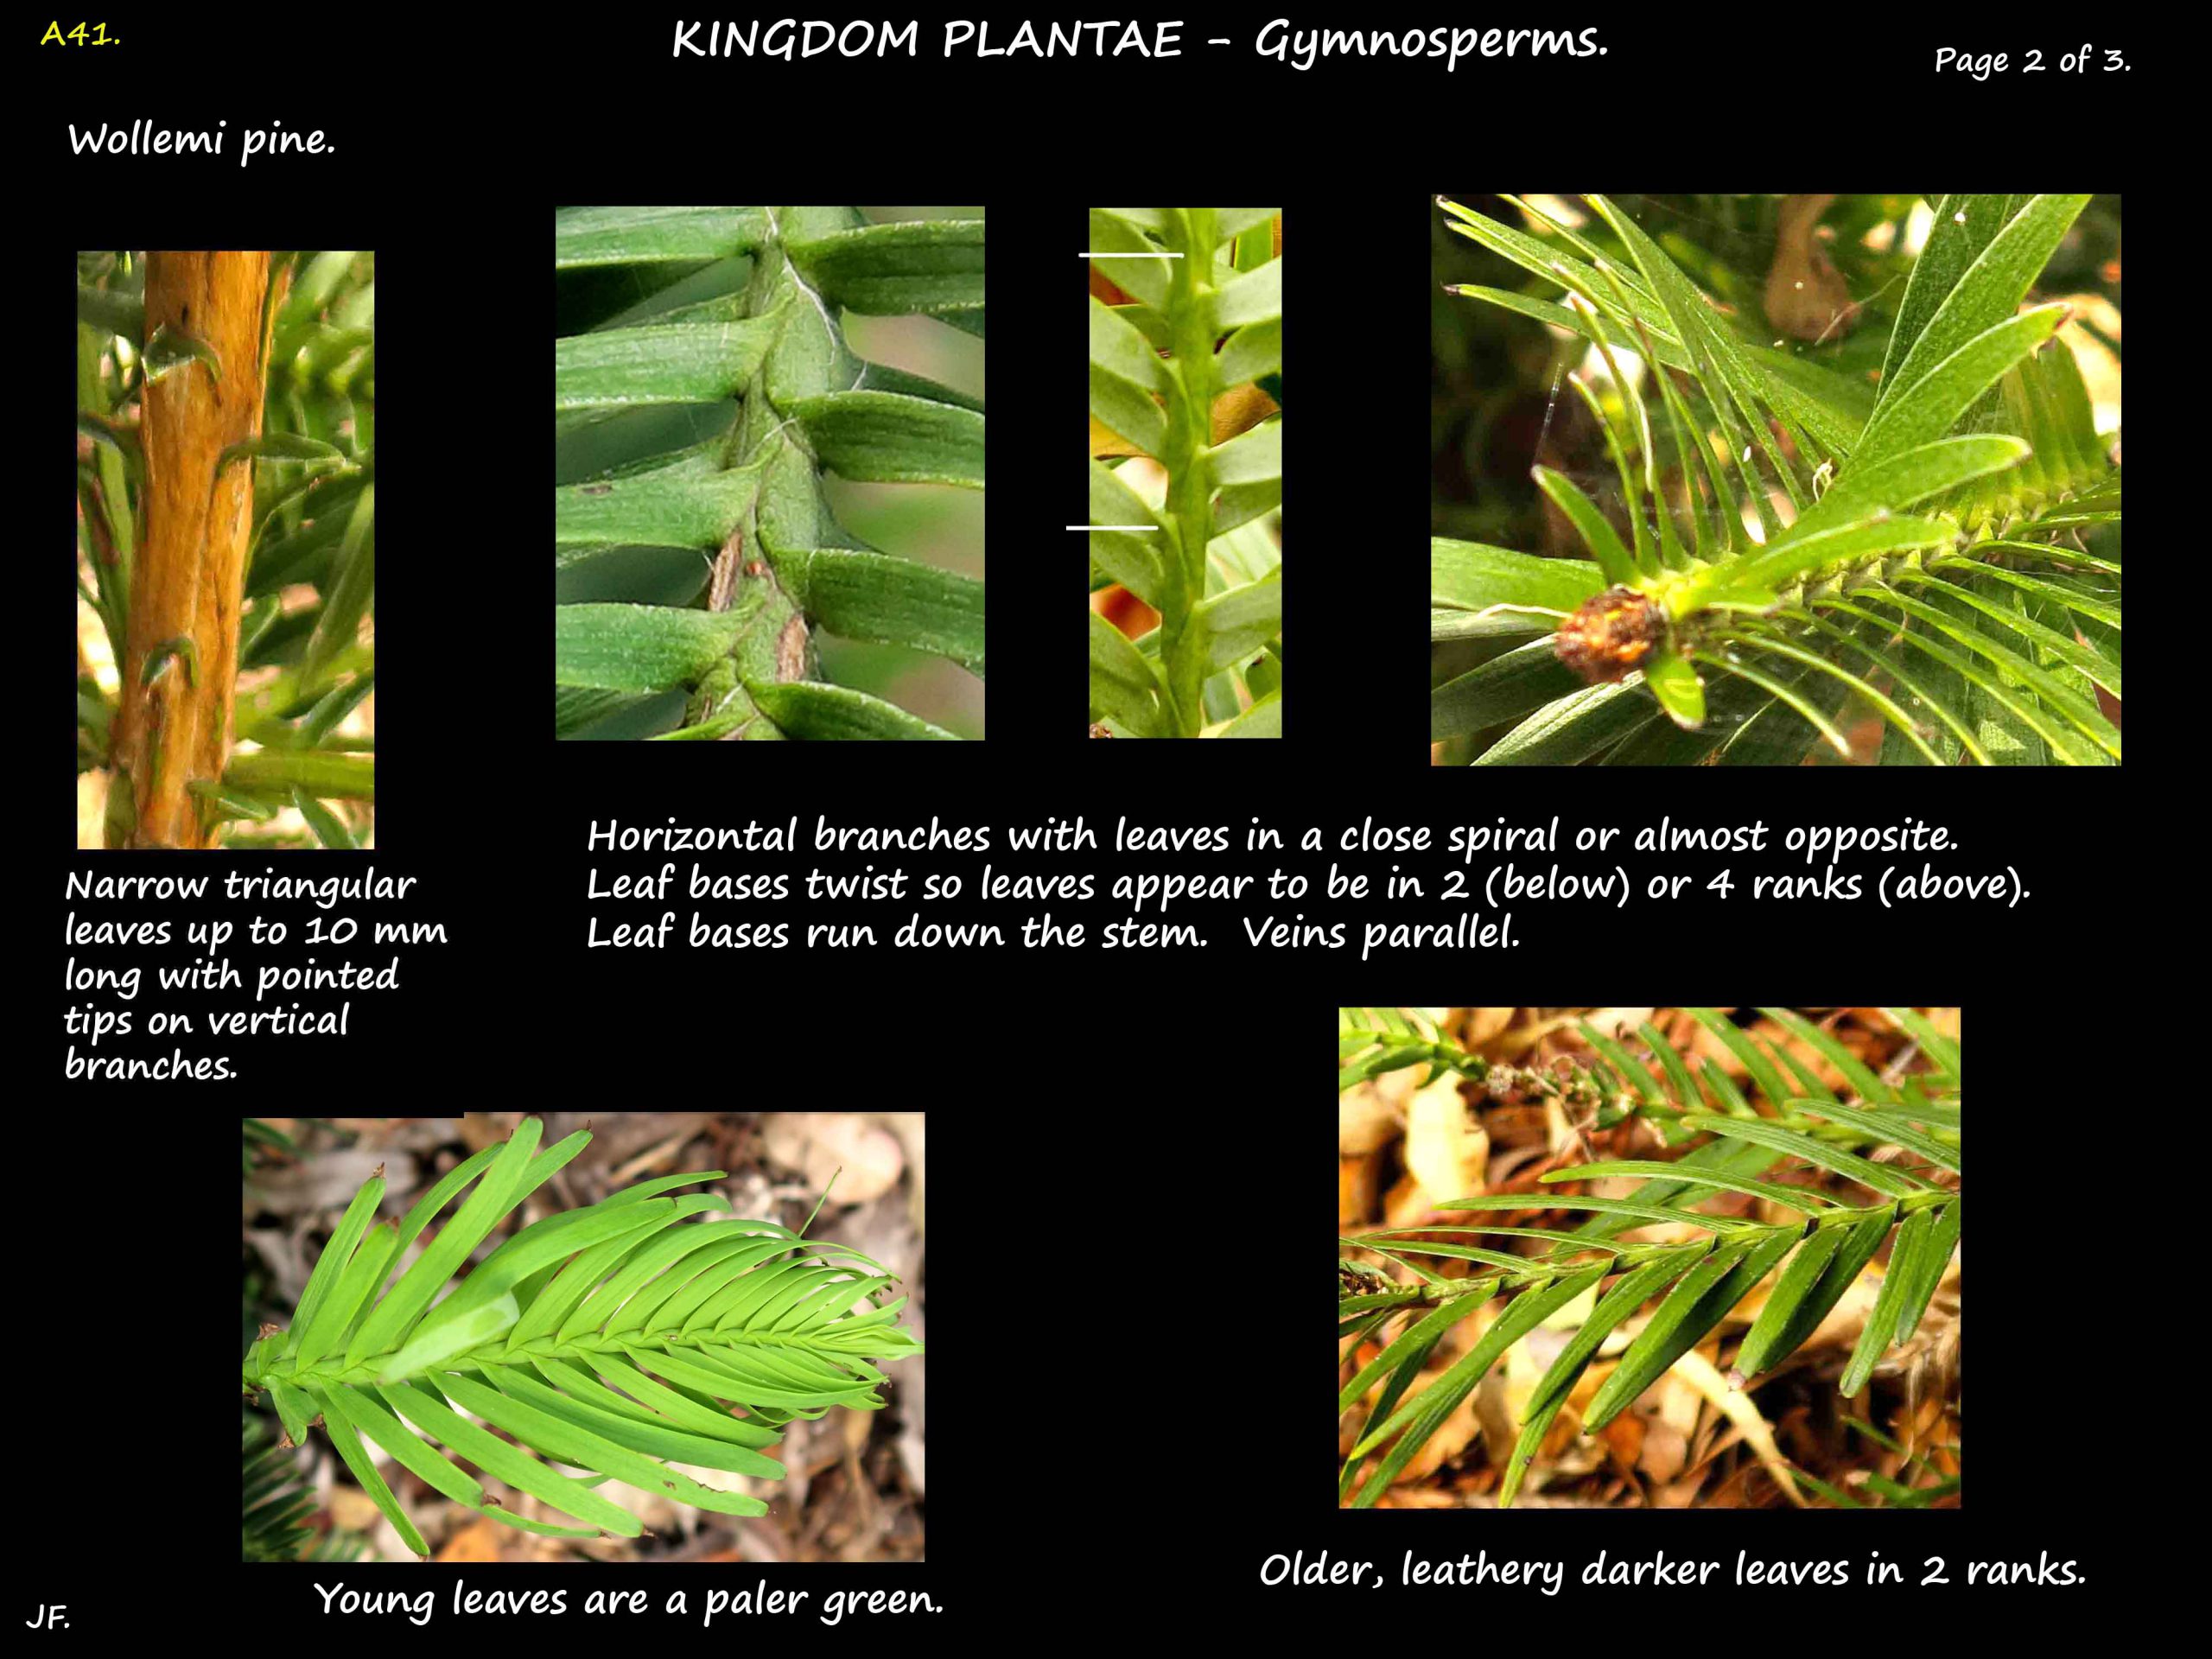 2 Wollemi pine leaves